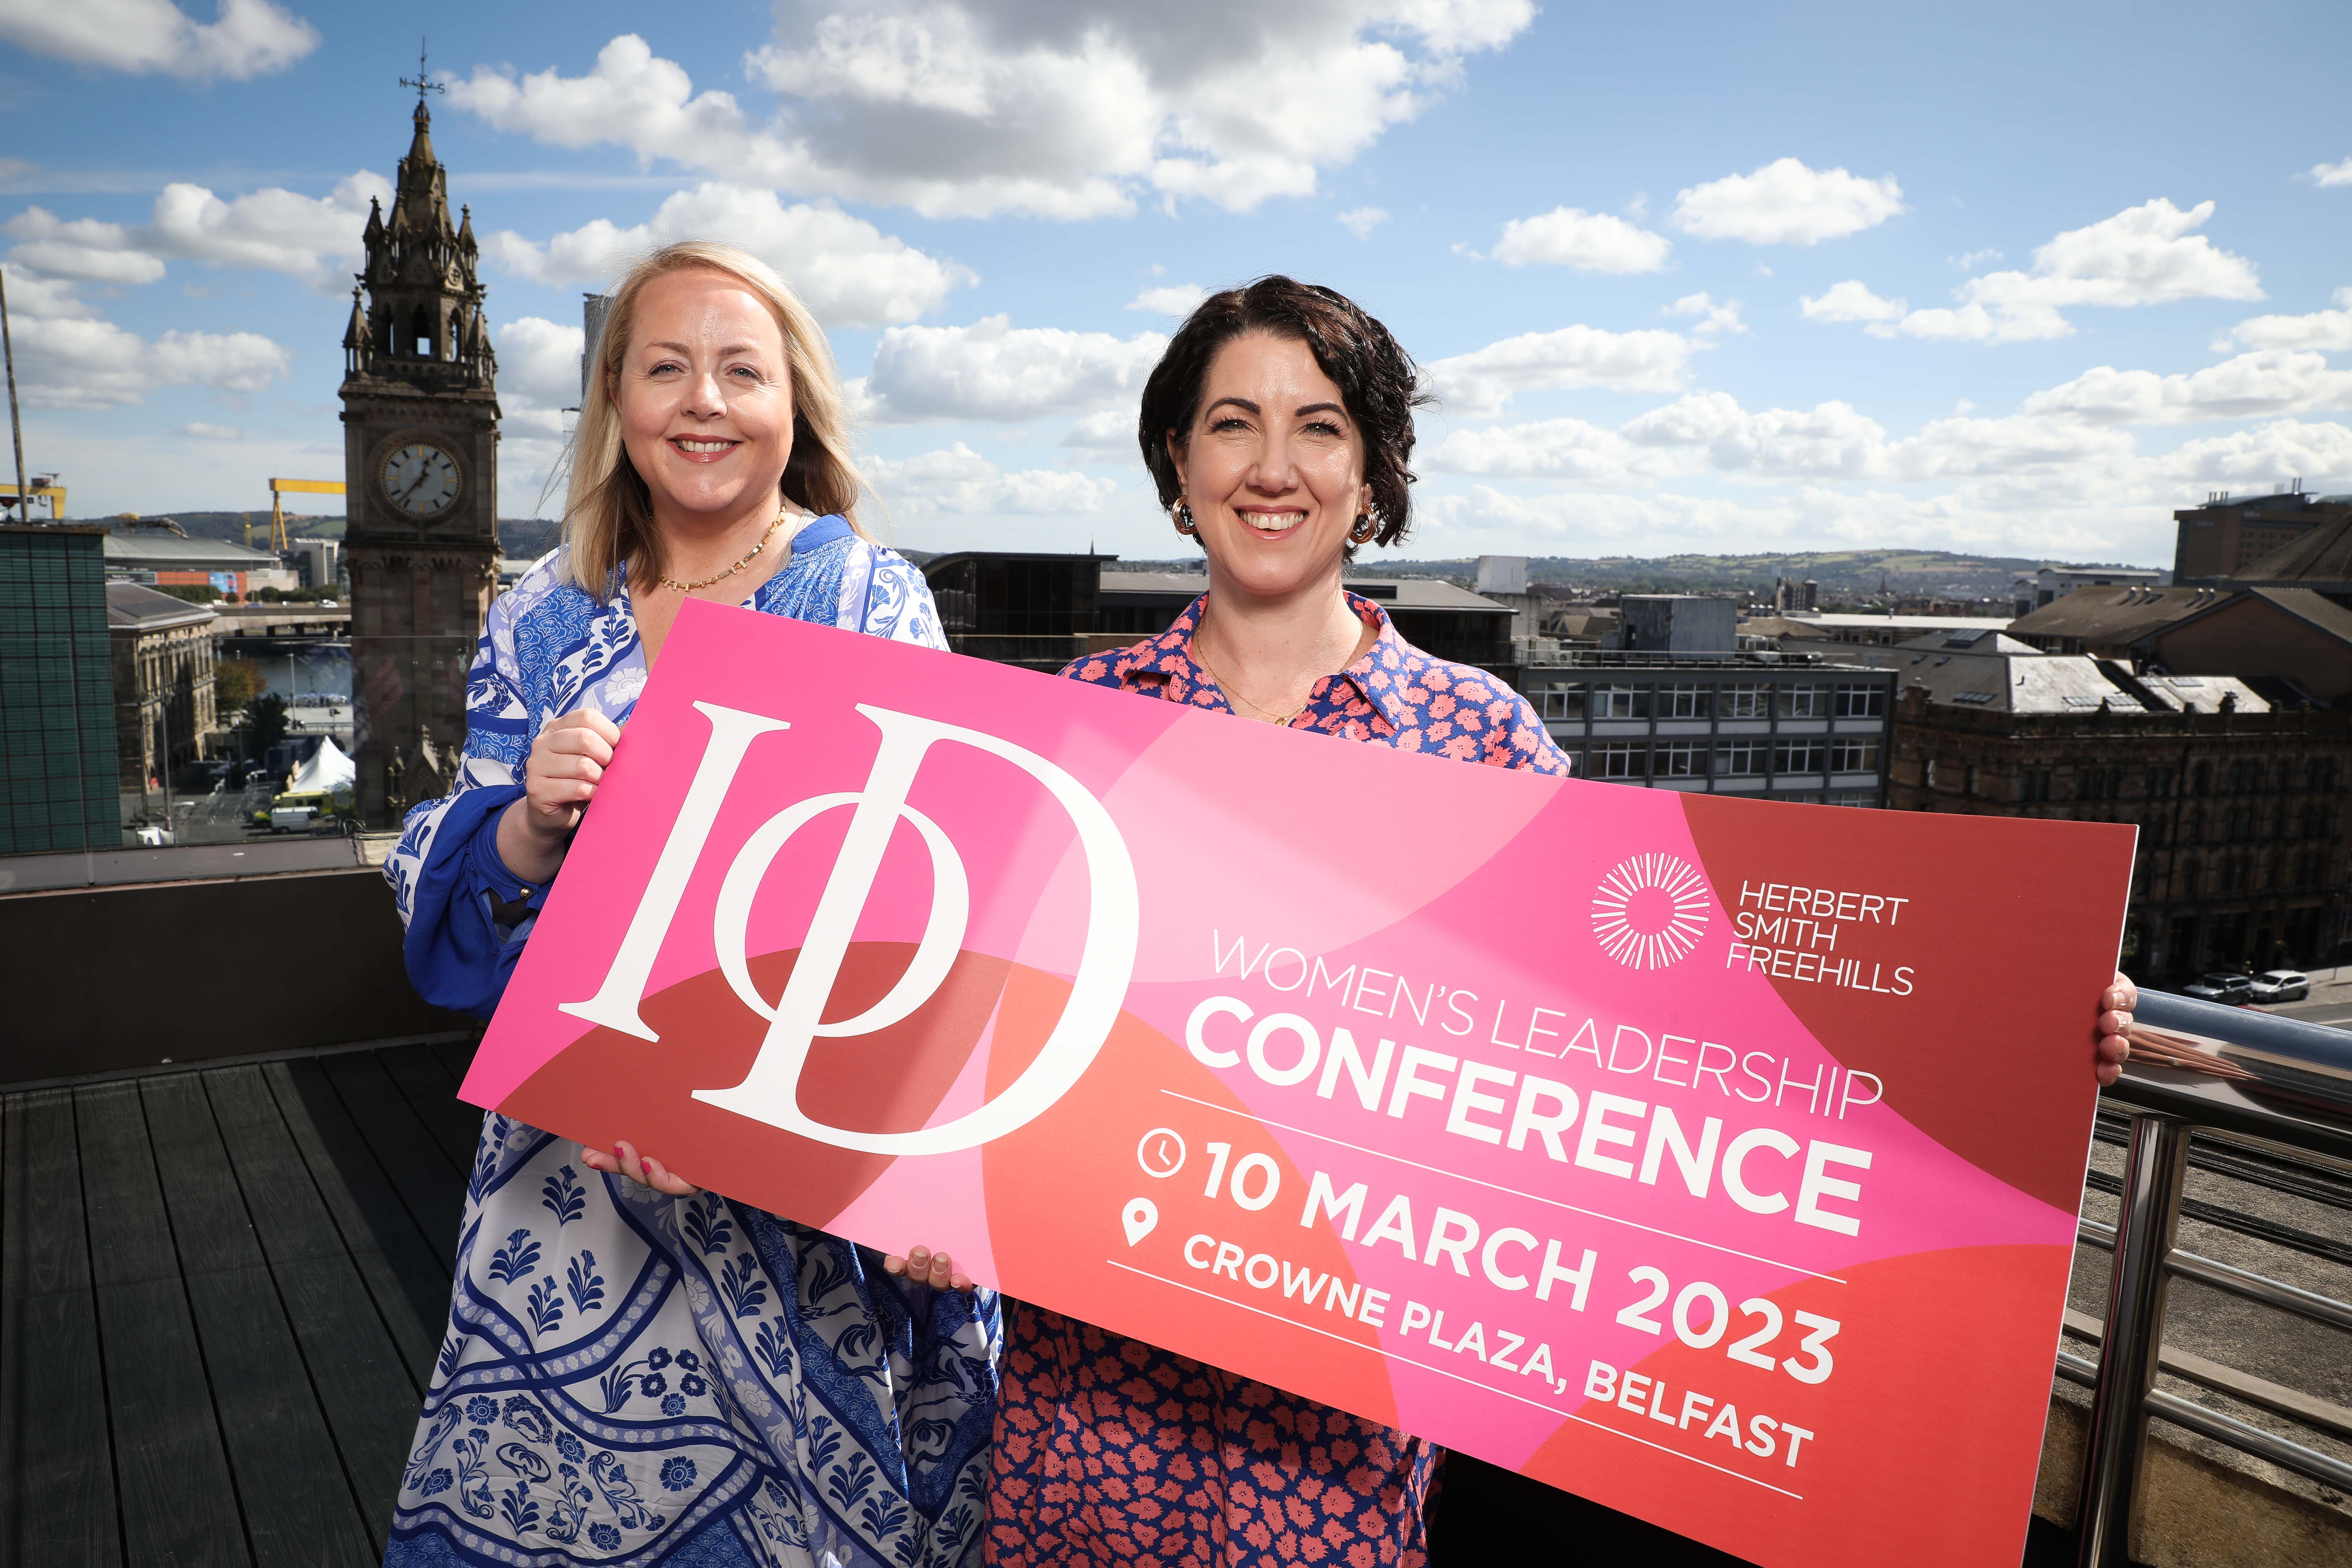 Women's Leadership Conference 10 Mar 2023 Business Events Institute of Directors